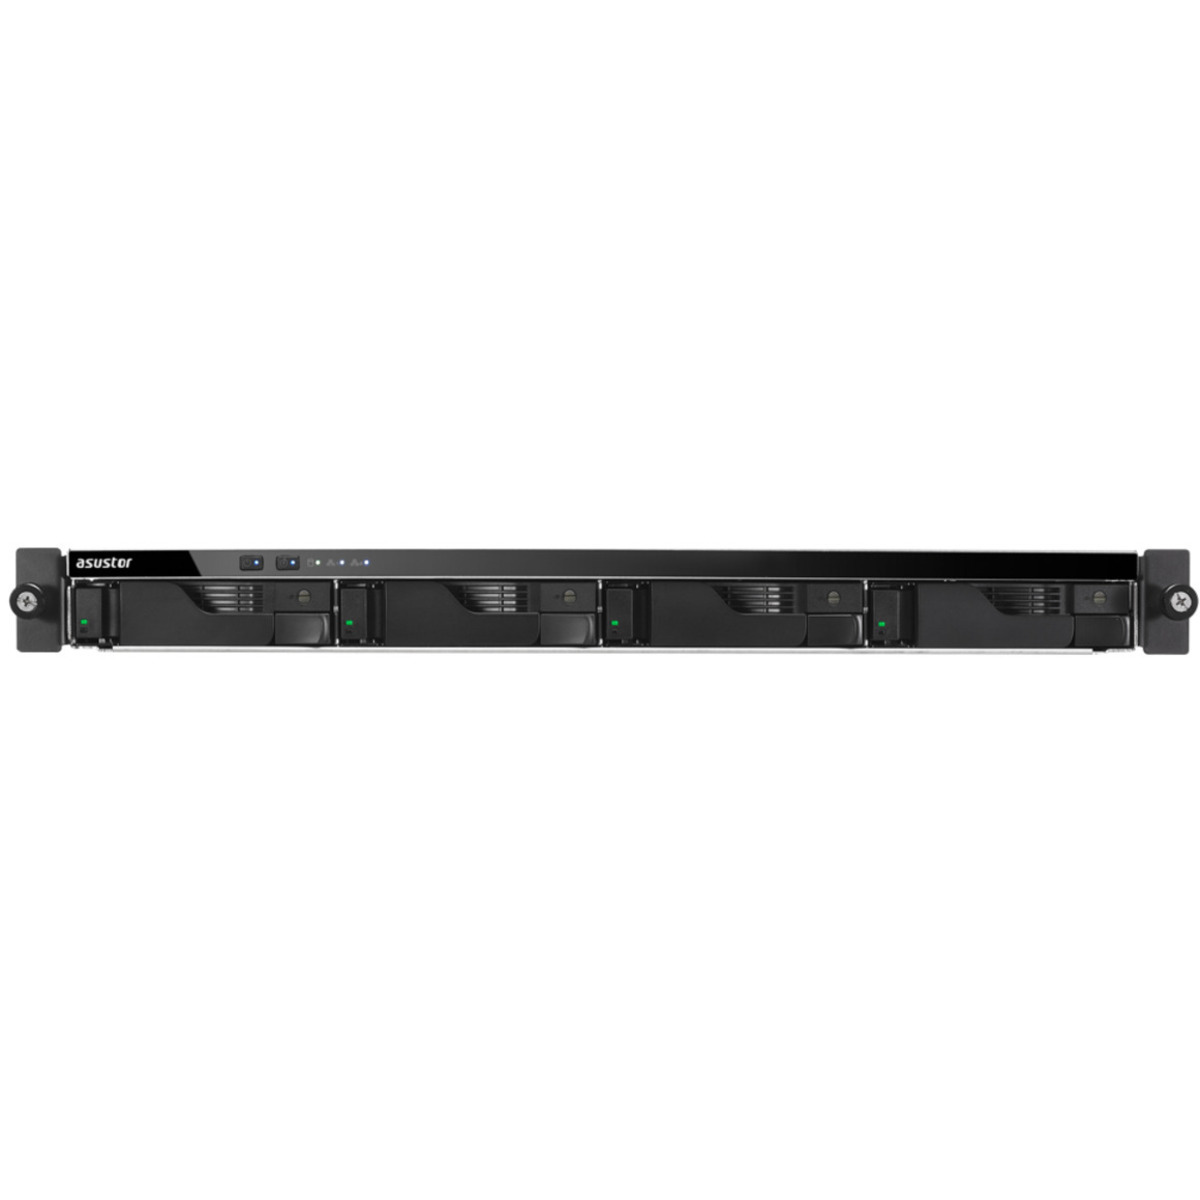 buy $2548 ASUSTOR LOCKERSTOR 4RS AS6504RS 64tb RackMount NAS - Network Attached Storage Device 4x16000gb Toshiba Enterprise Capacity MG08ACA16TE 3.5 7200rpm SATA 6Gb/s HDD ENTERPRISE Class Drives Installed - Burn-In Tested - FREE RAM UPGRADE - nas headquarters buy network attached storage server device das new raid-5 free shipping simply usa LOCKERSTOR 4RS AS6504RS